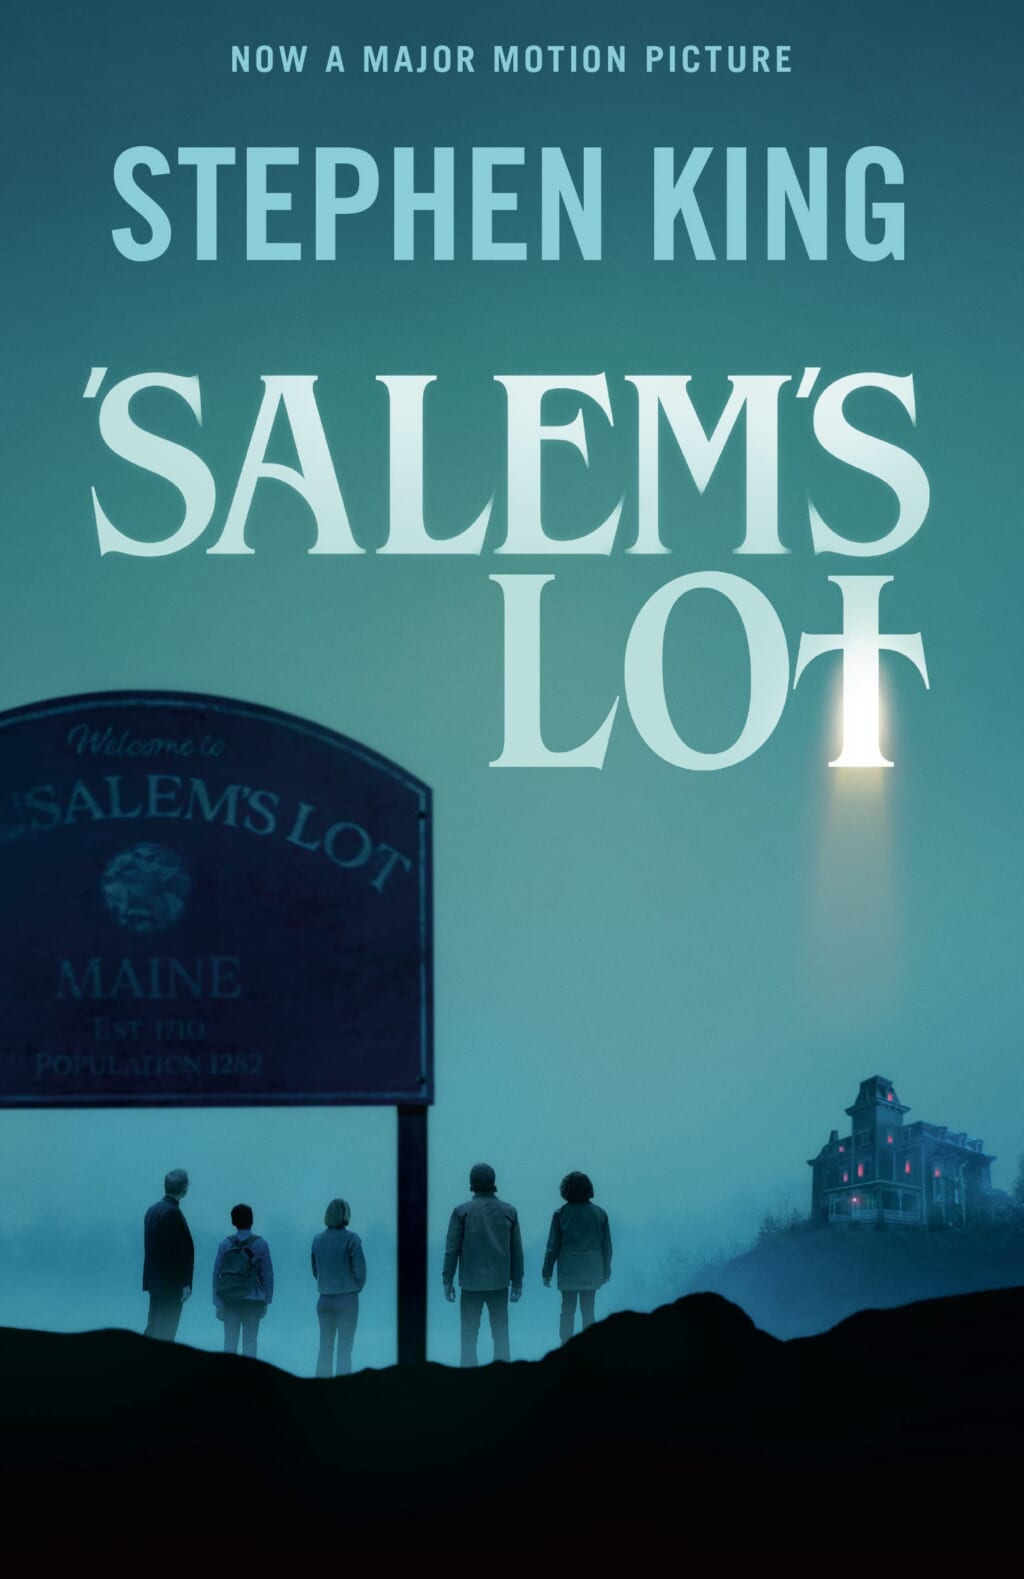 Stephen King's 'Salem's Lot' Gets Spooky New Movie TieIn Book Cover